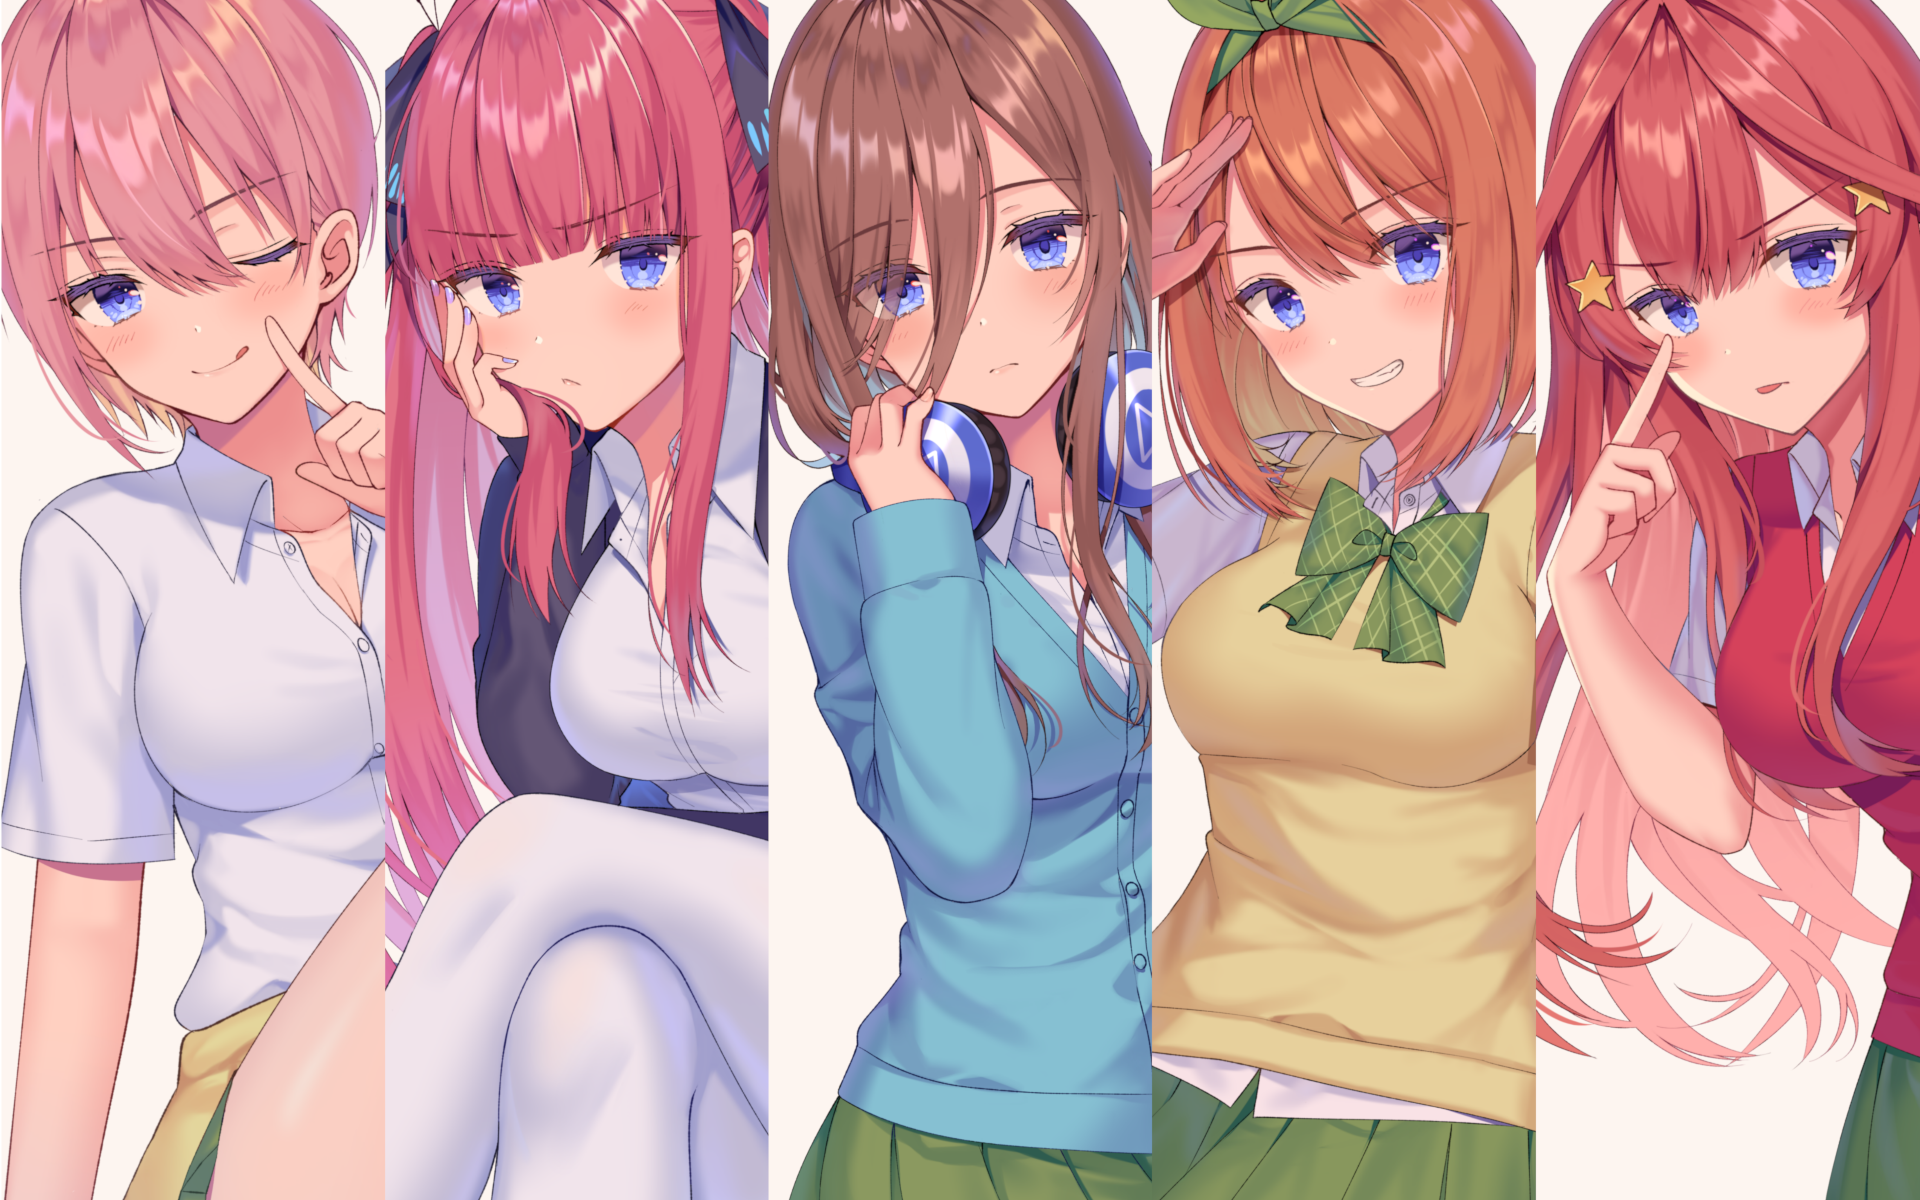 2. Miku Nakano from The Quintessential Quintuplets - wide 4